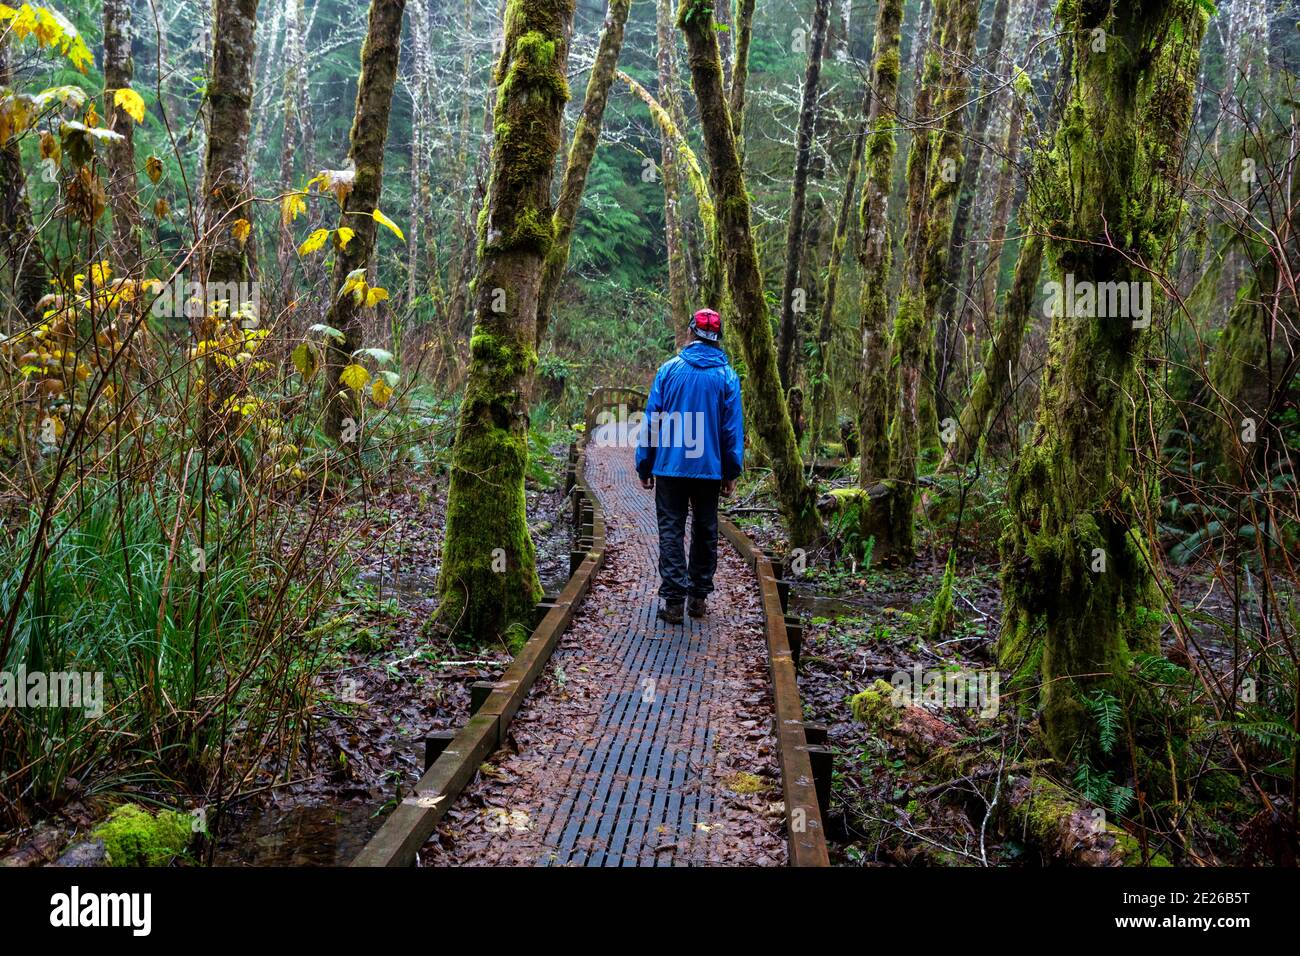 OR02597-00...OREGON - Hiker on a broadwalk over a swampy area on a rainy day along the South Slough Creek Trail in the Lewis and Clark National Histor Stock Photo